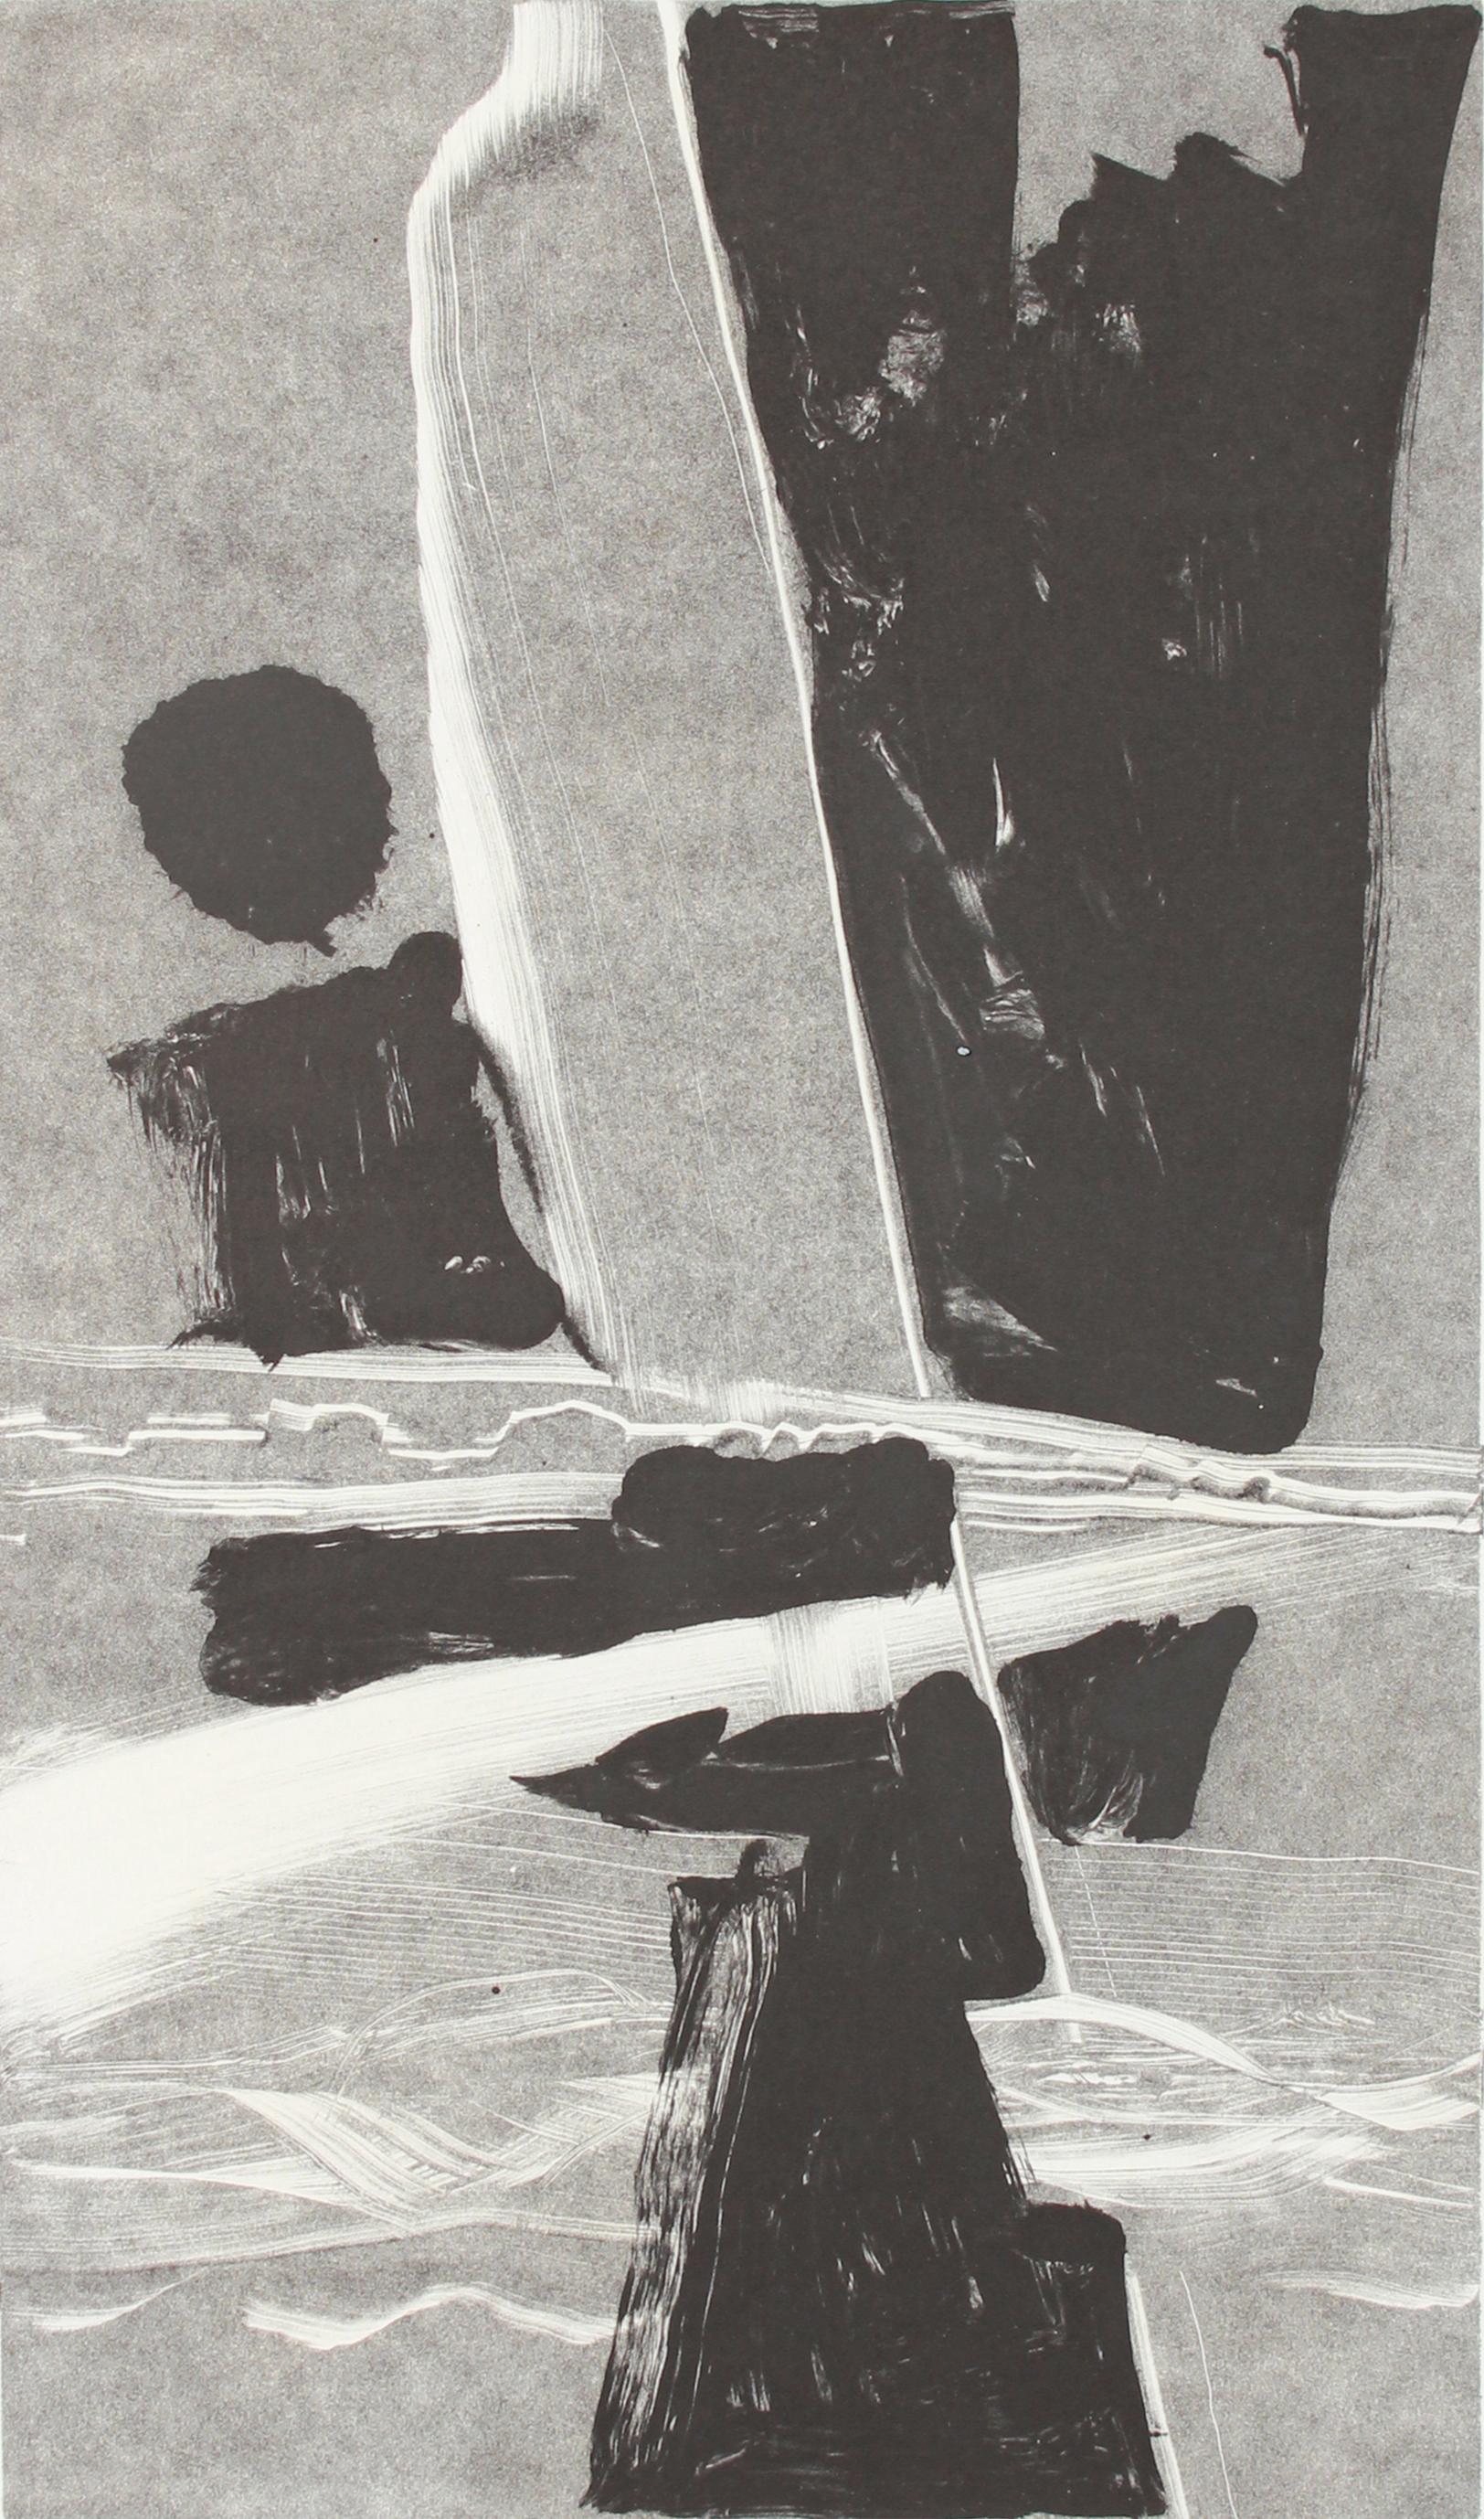 This black and white abstract monotype on paper print, circa late 1990s-early 2000s, is by Bay Area painter, printmaker, and designer Calvin Anderson (b. 1925).  He studied at CCAC and Art Center College in the 1940s and worked as a commercial art